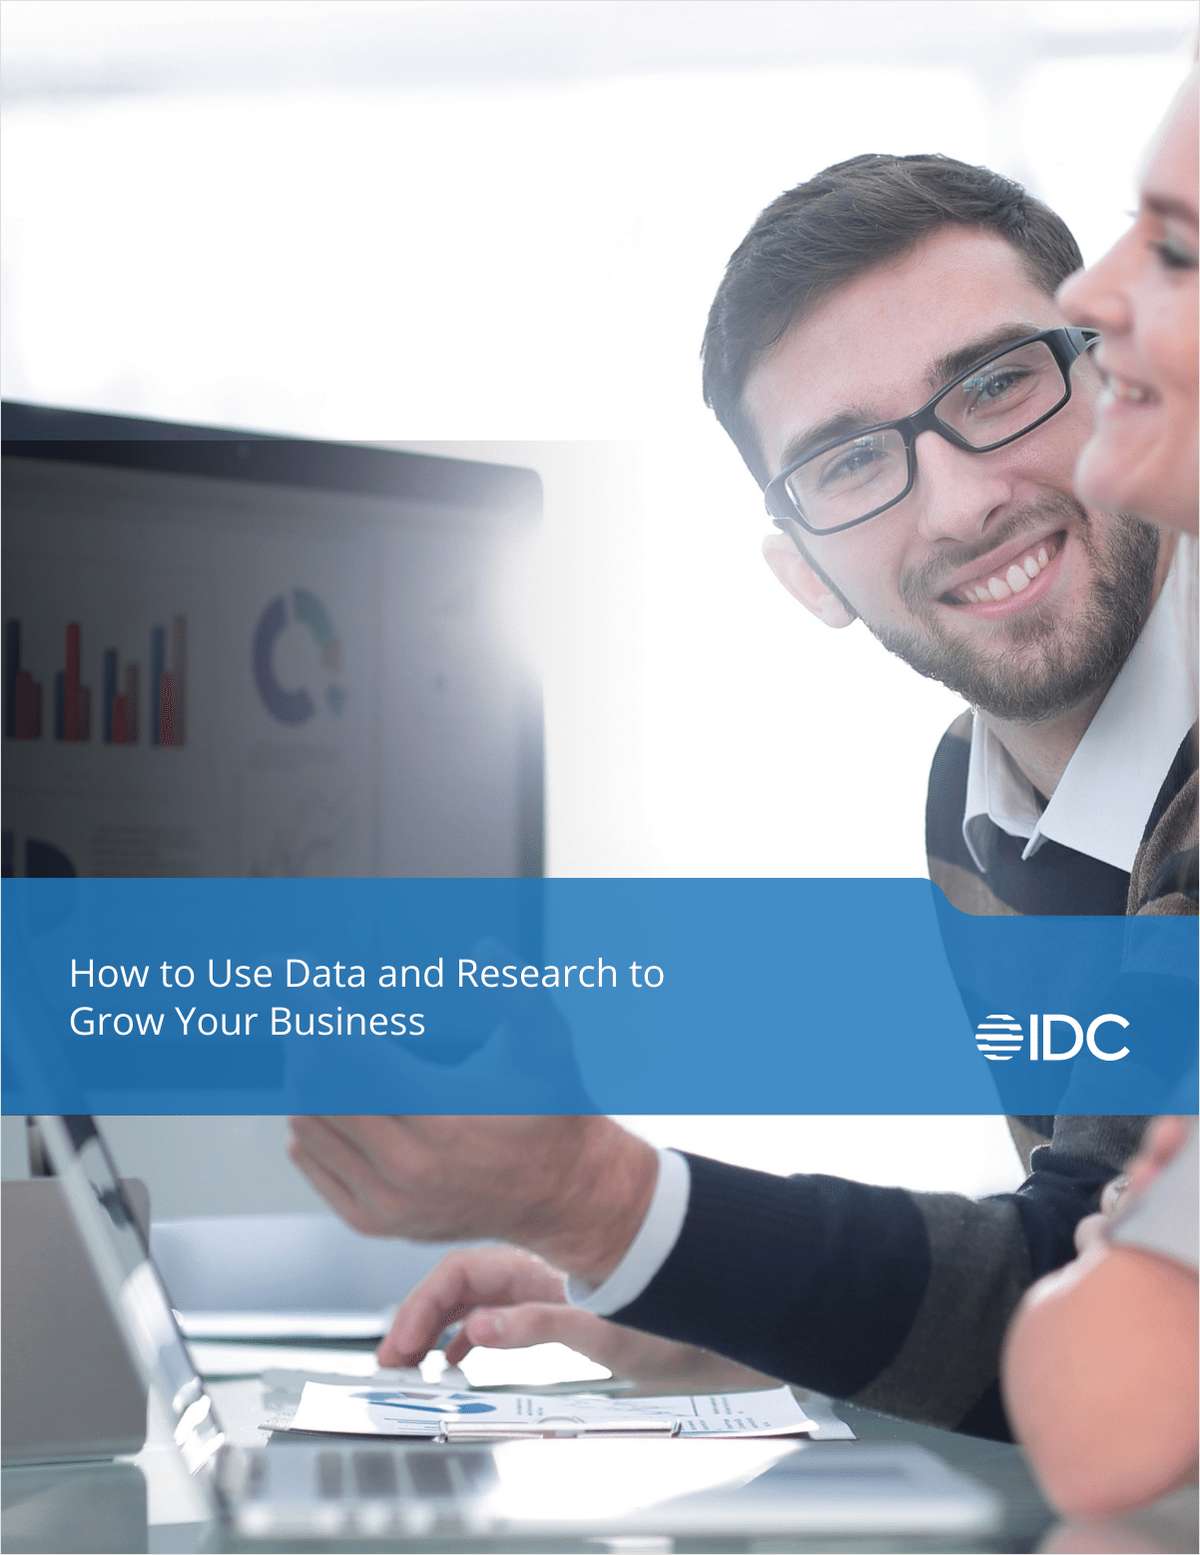 How to Use Data and Research to Grow Your Business